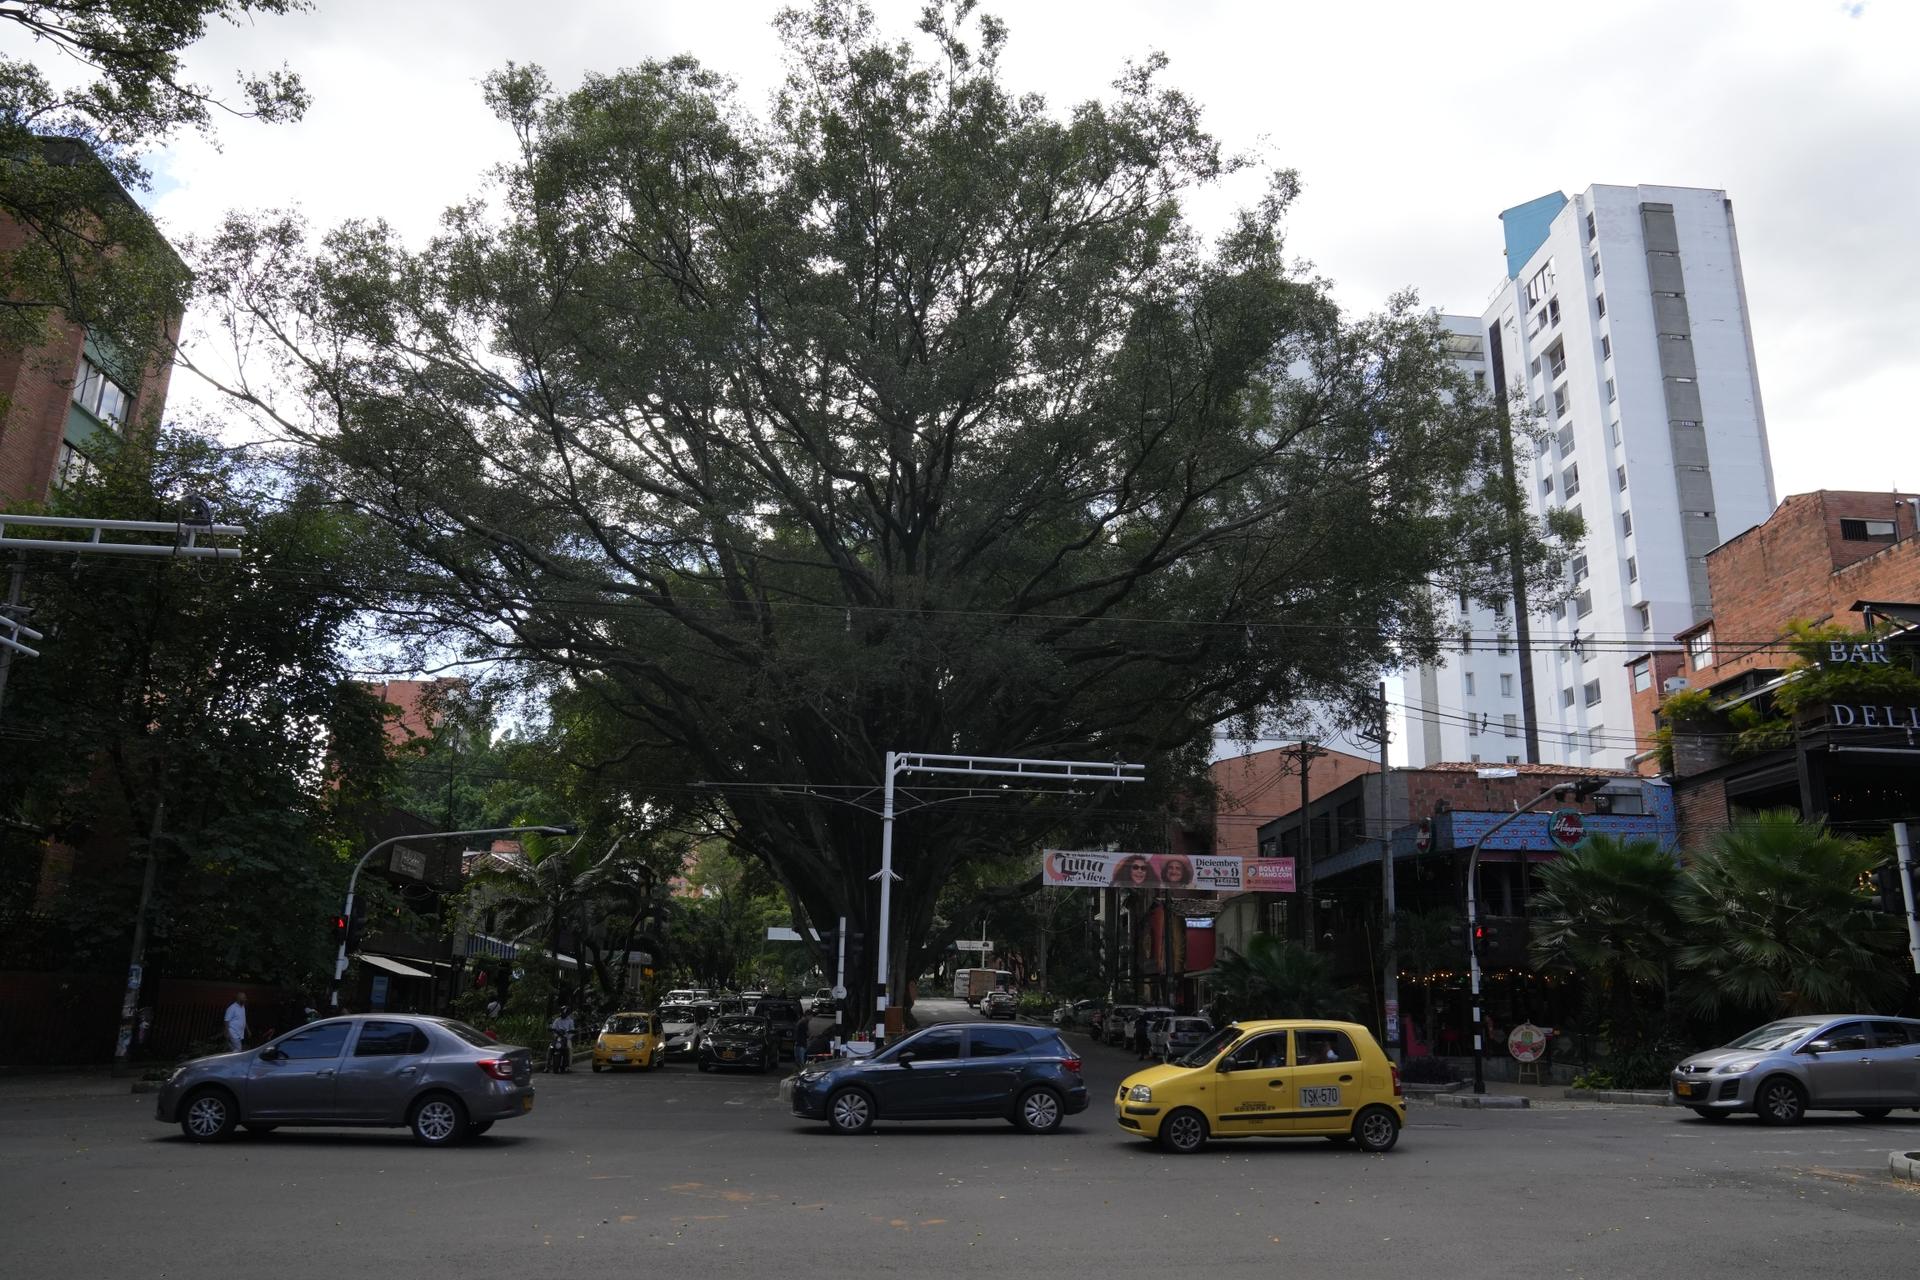 The leafy sector of Laureles is popular with tourists. But some locals have complained that they are being priced out of this neighborhood.